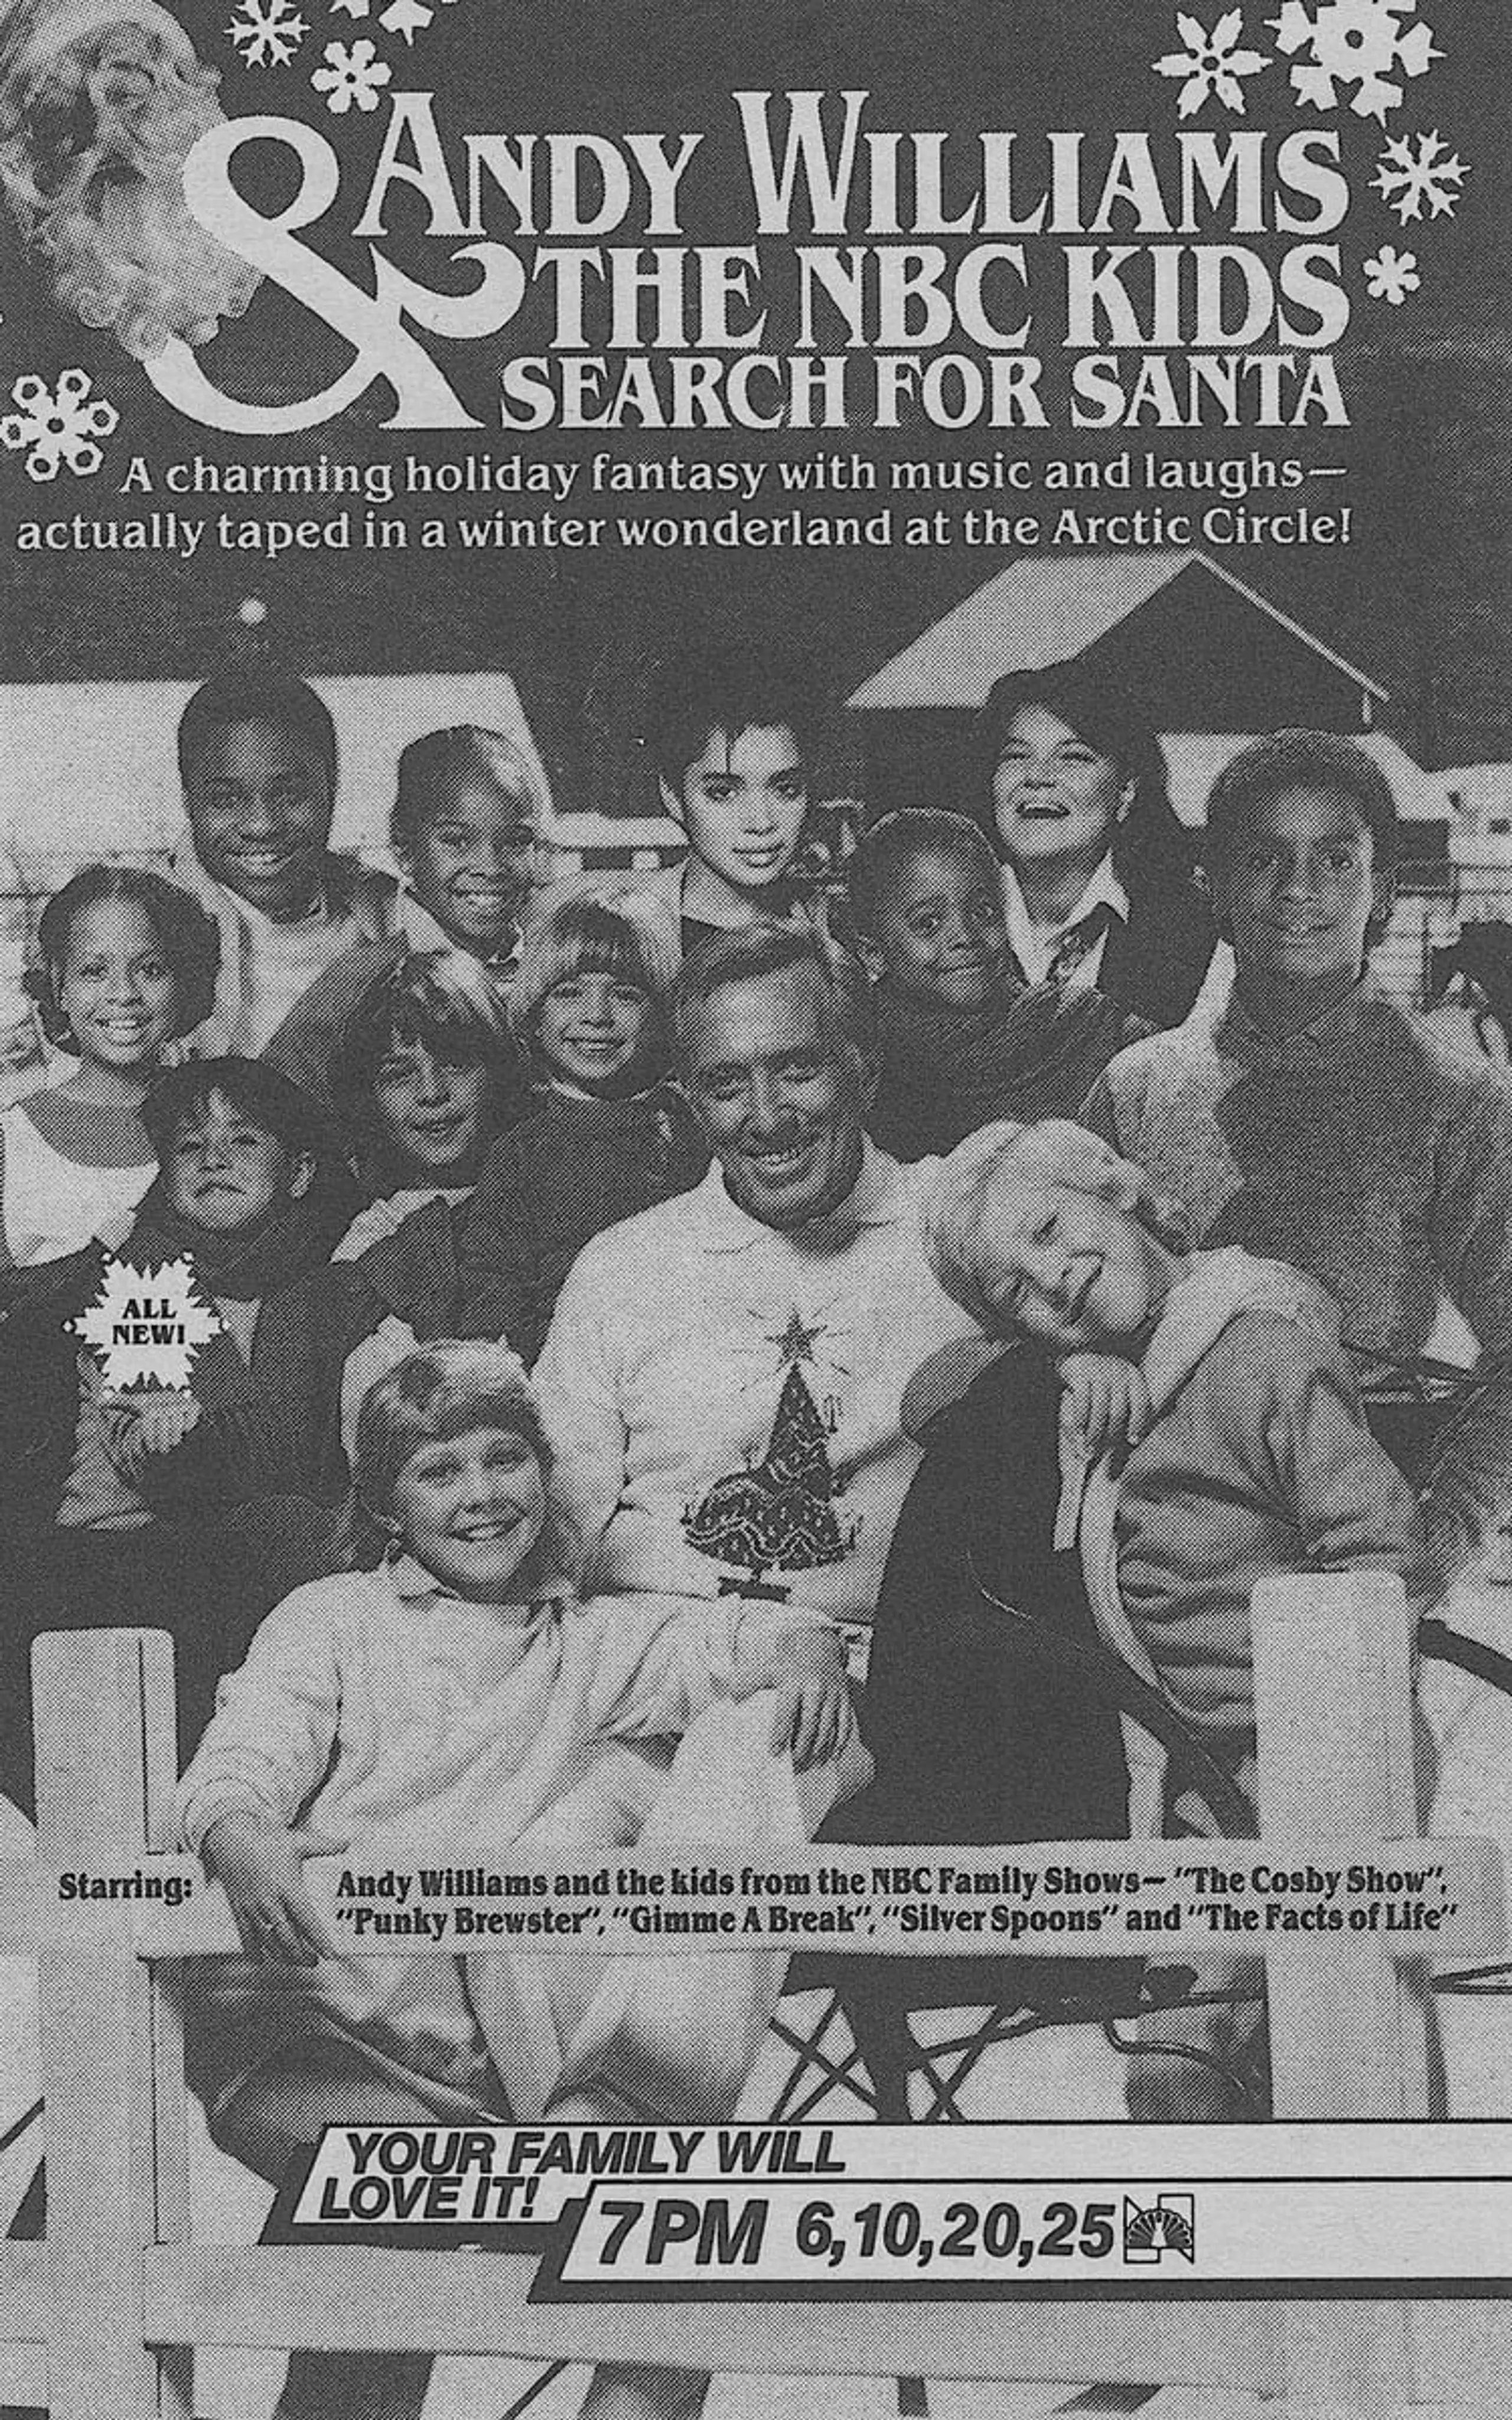 Andy Williams and the NBC Kids Search for Santa